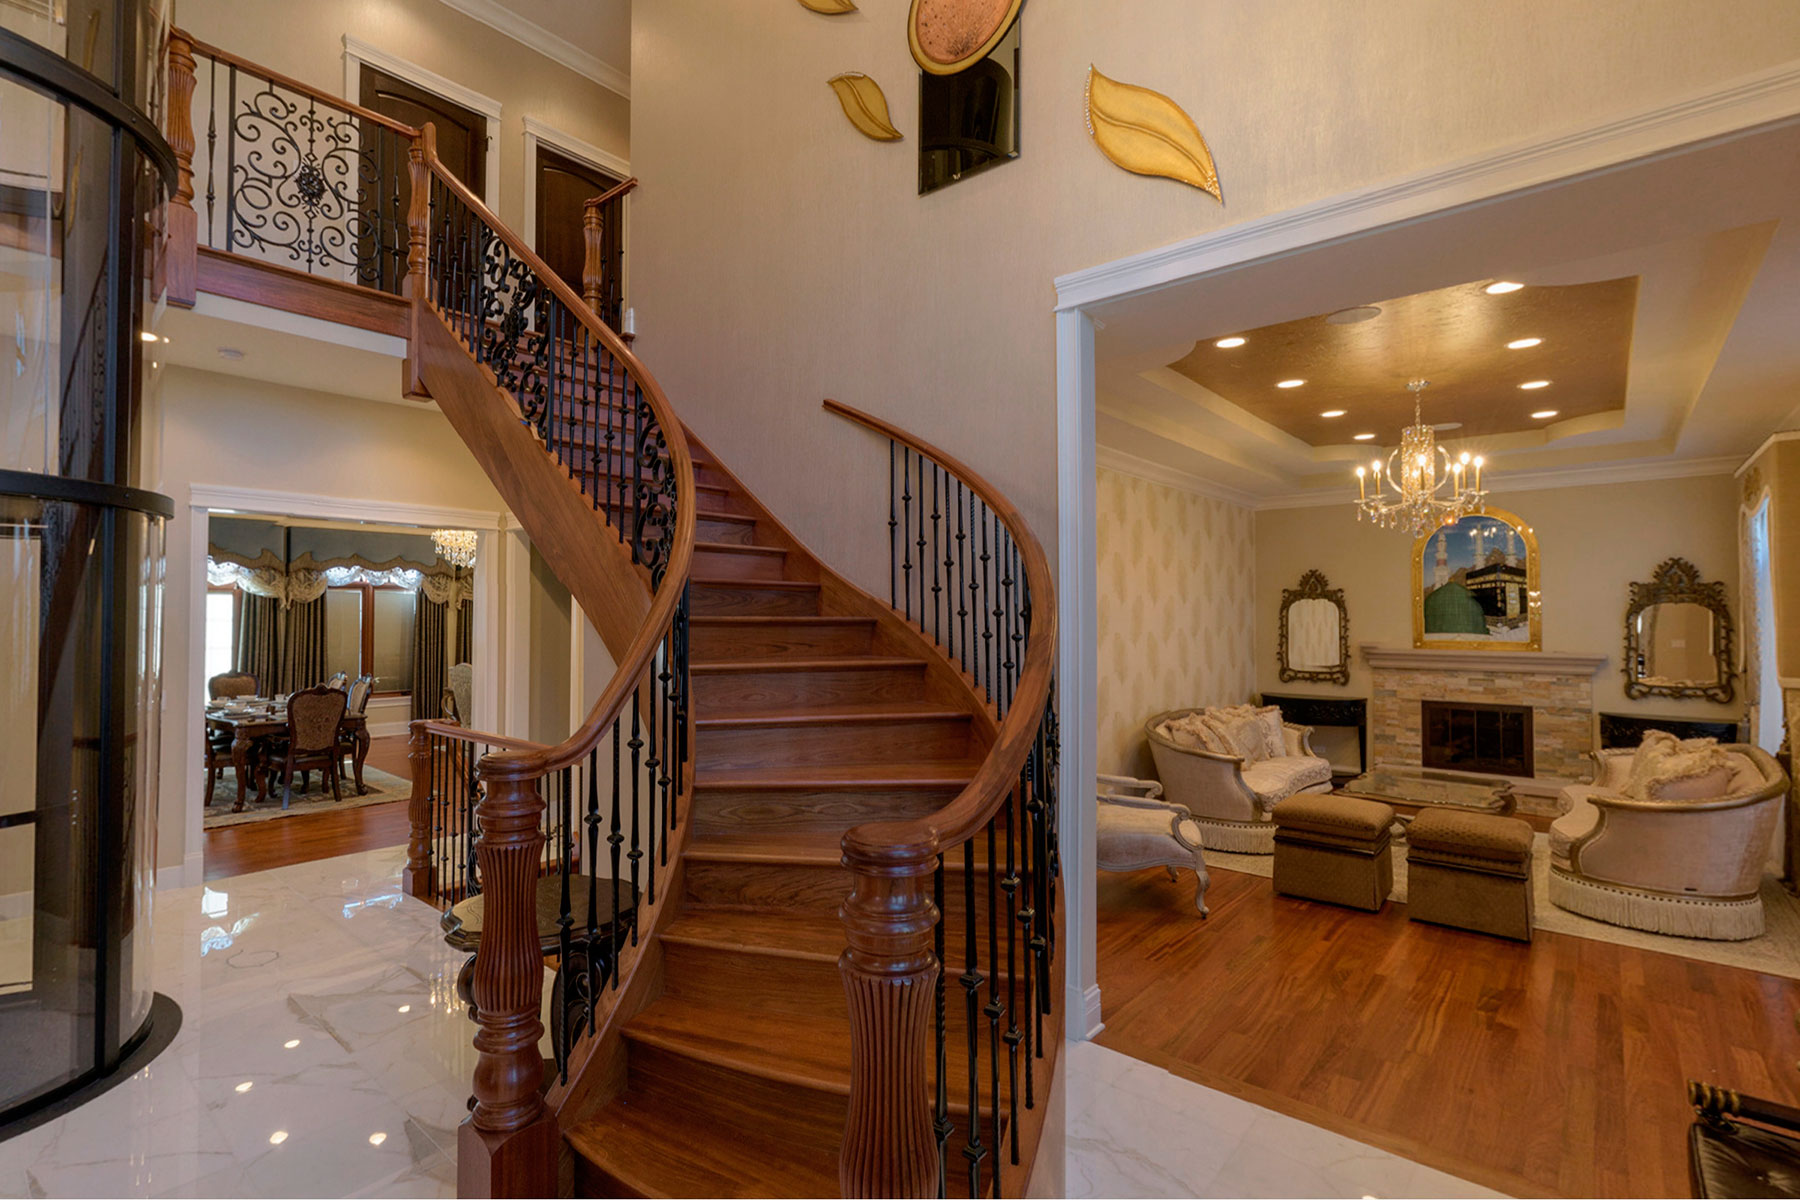 Foyer, Stairs, Formal Living Room - Mango Ave., Morton Grove, IL Custom Home. America's Custom Home Builders: New Construction, Remodeling, Restoration Services. Residential and Commercial.